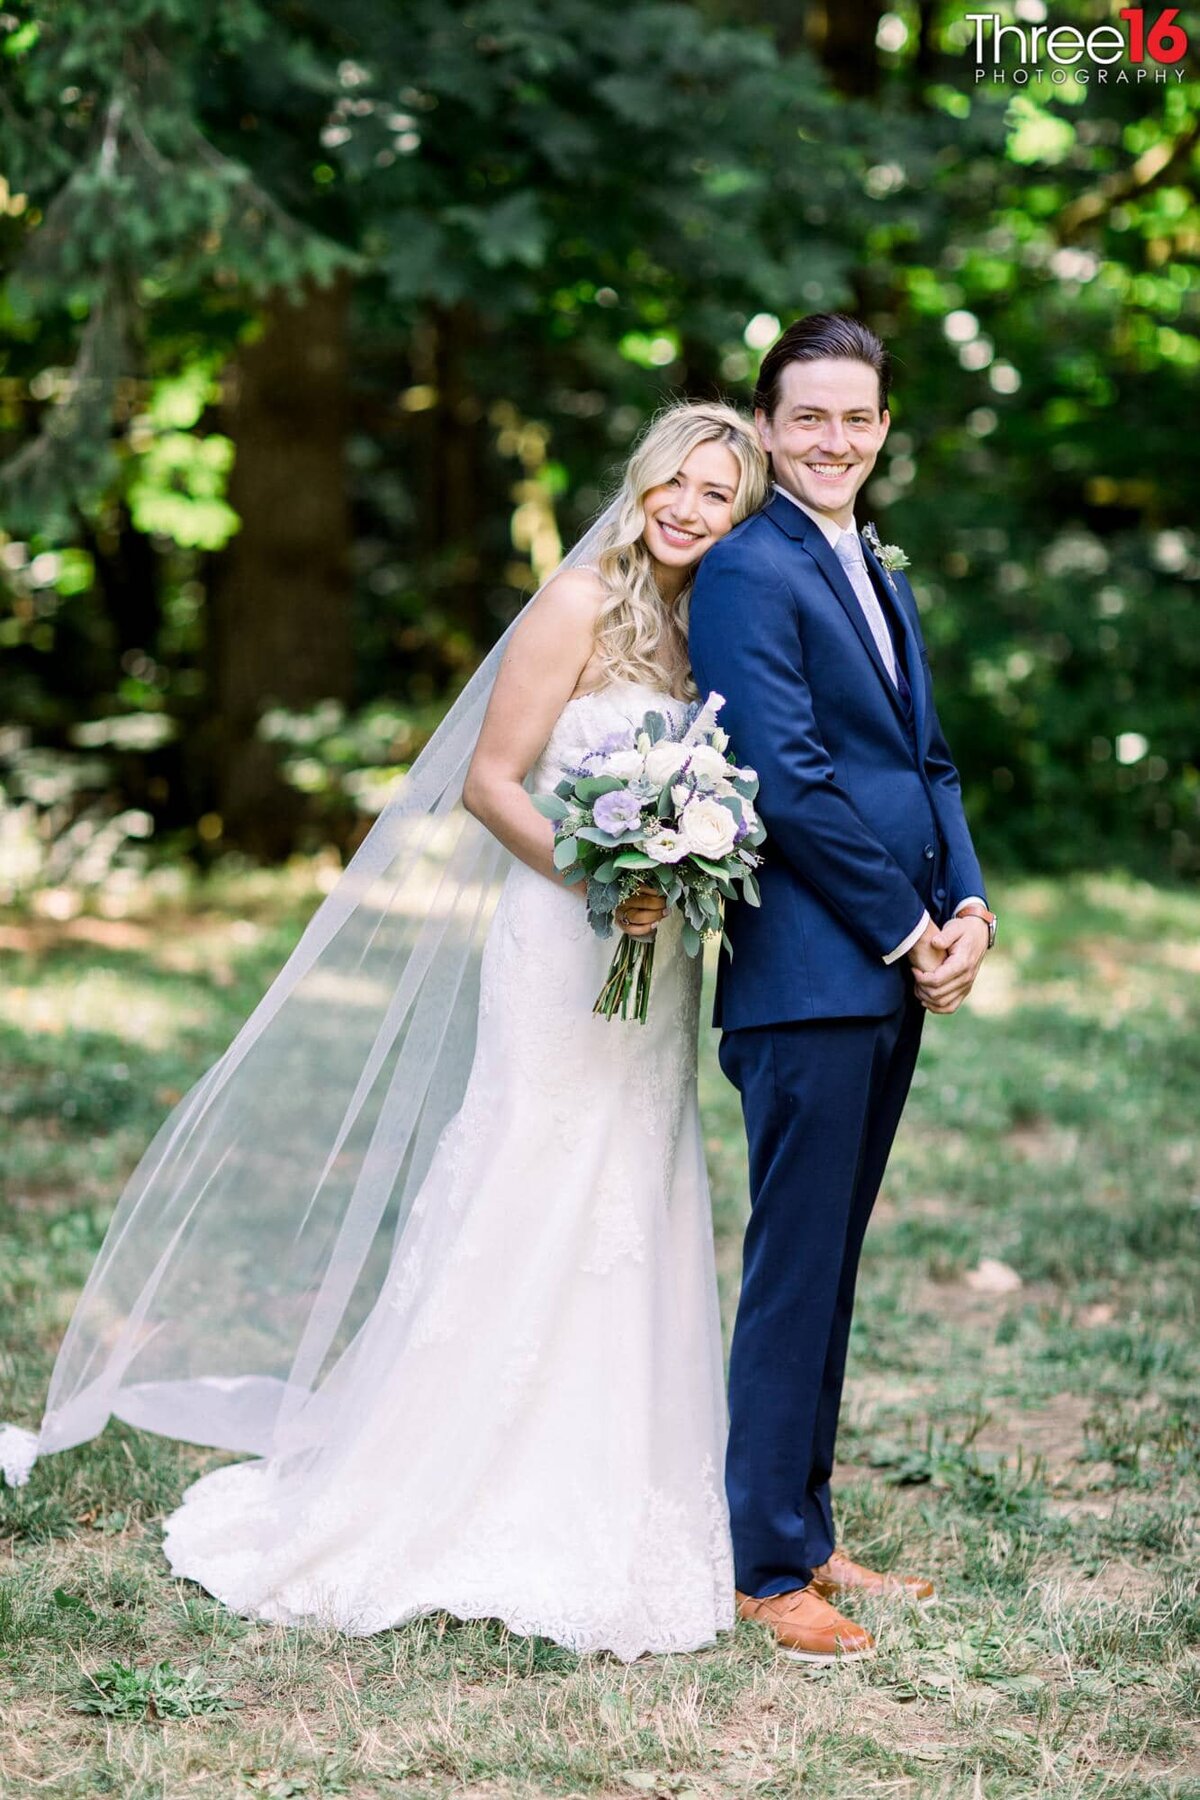 Bride snuggles up to her Groom from behind as they smile for the wedding photographer